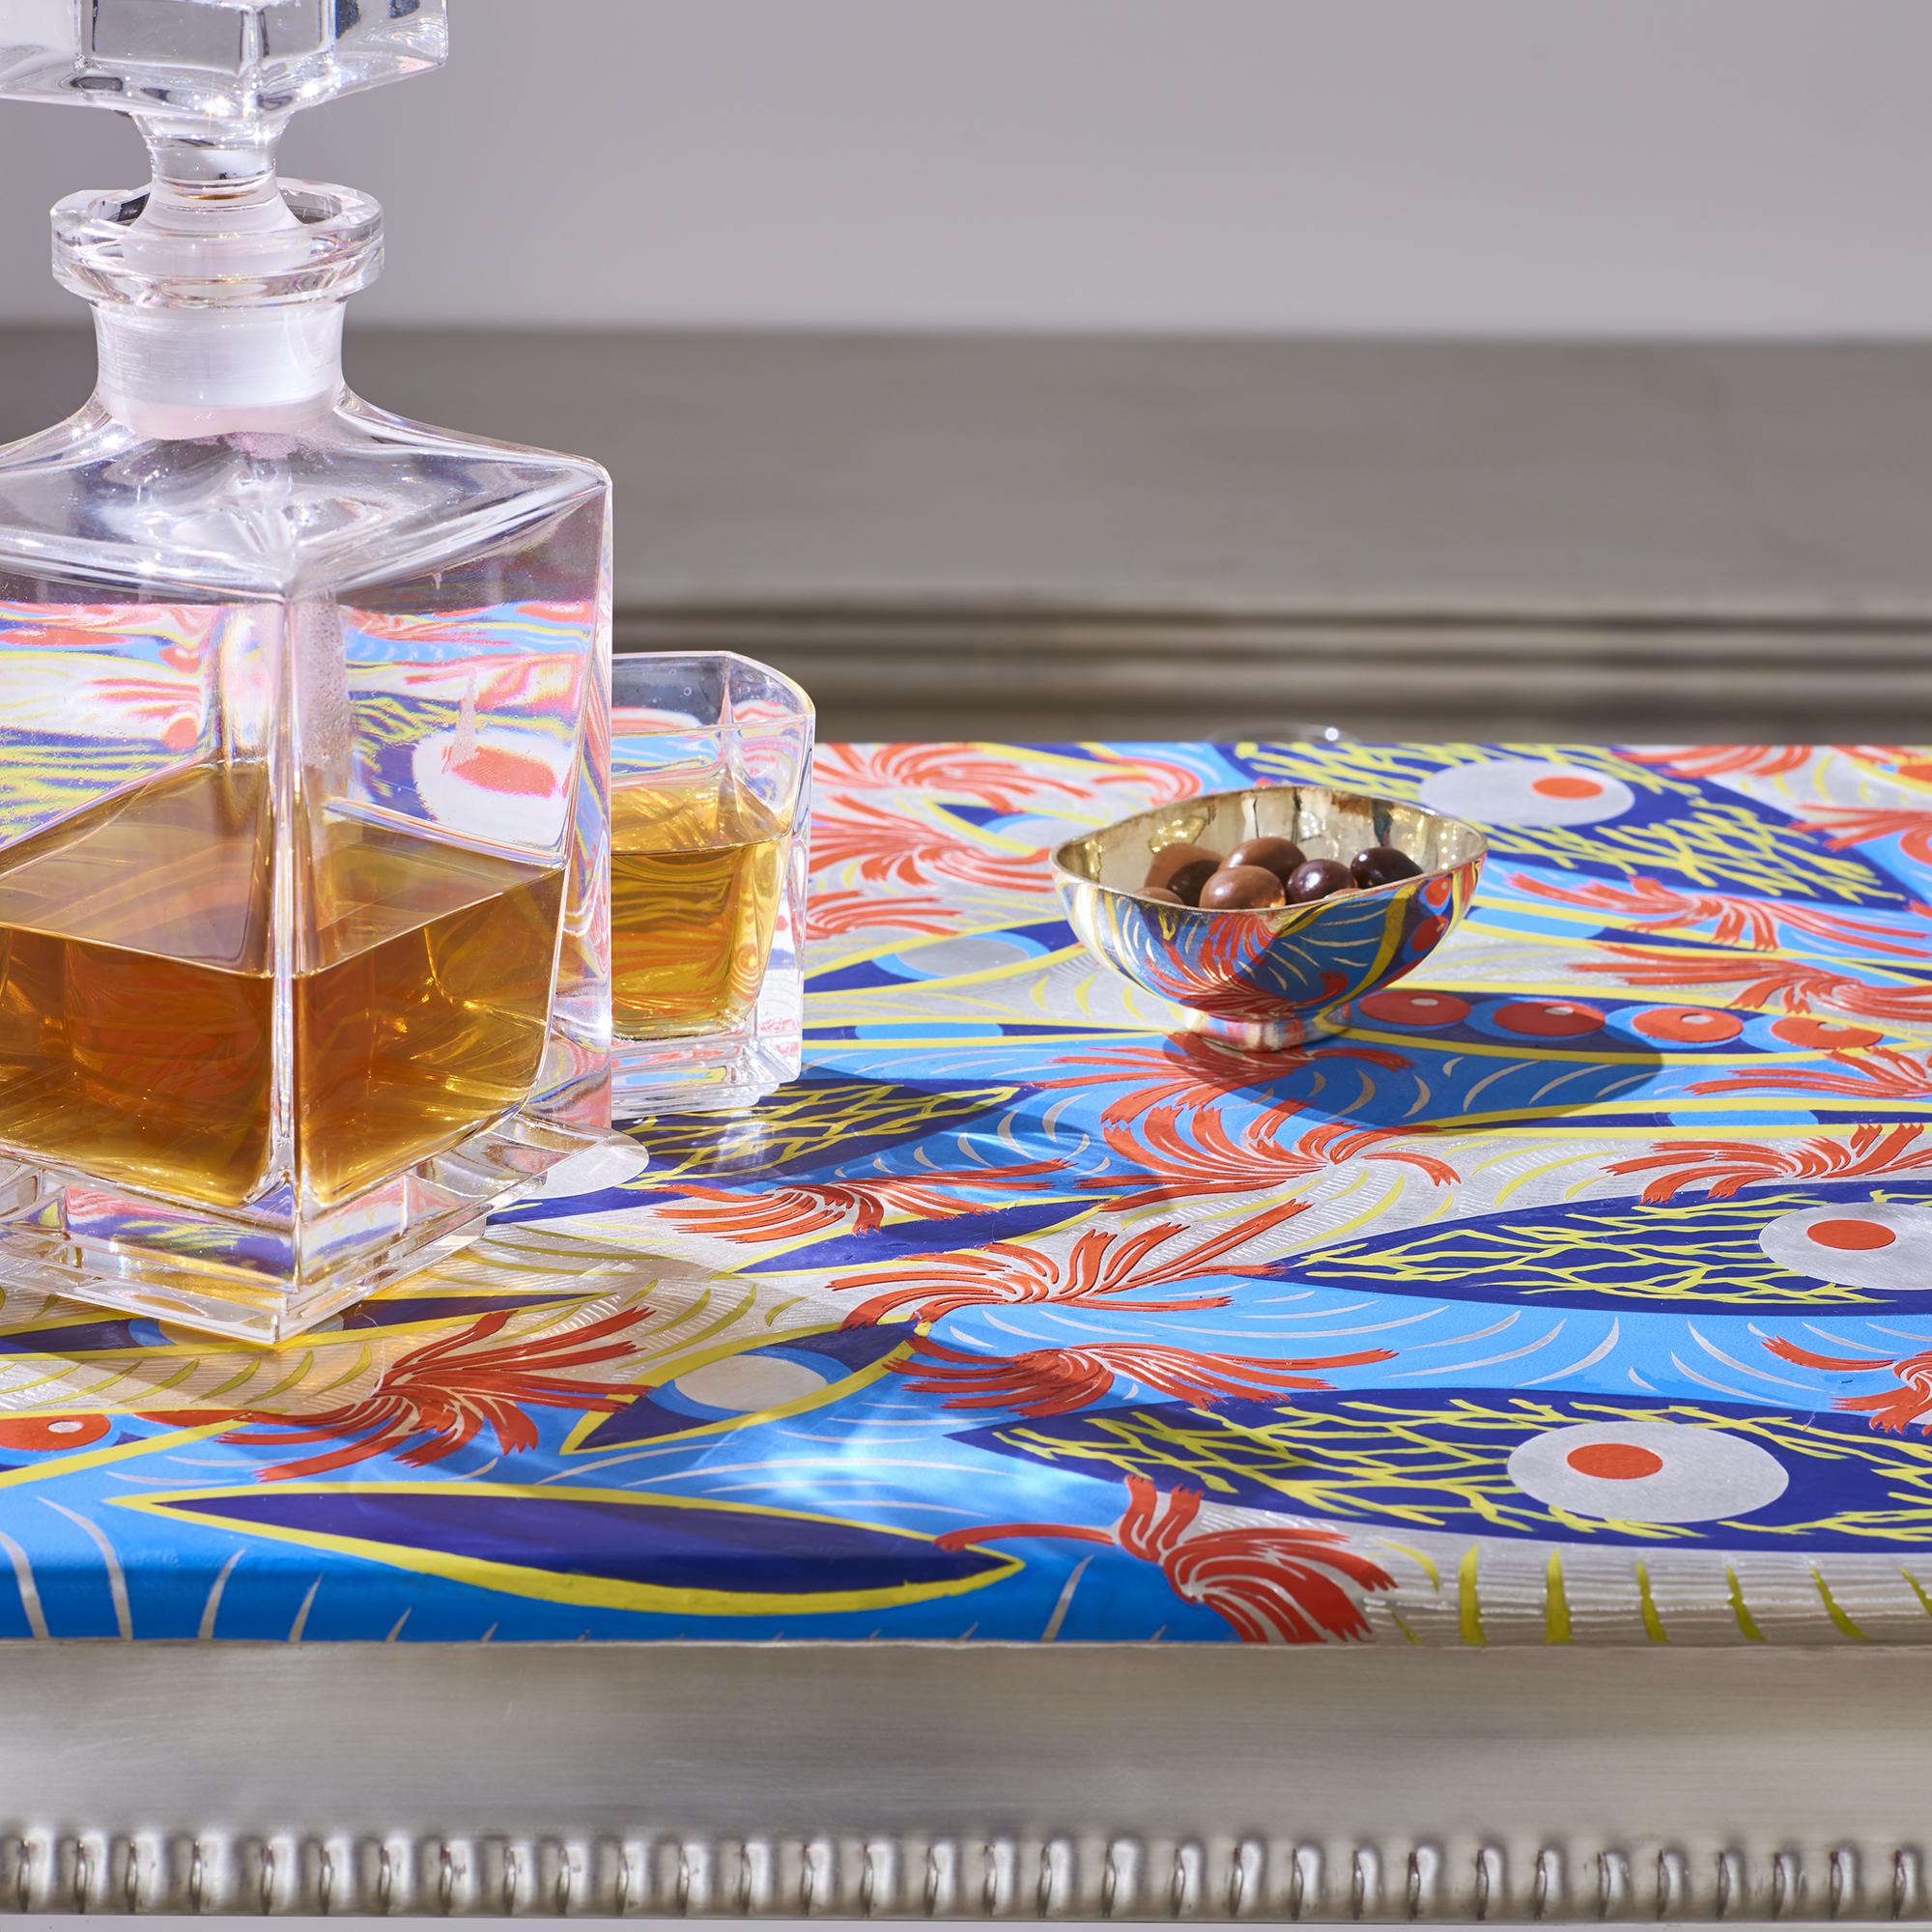 Artist Alice Saey has customized a colorful French pewter countertop, or a console top, that would make a cheery addition to a club, cocktail bar, beach bar or the home of a private art collector. This practical and functional piece is indisputably